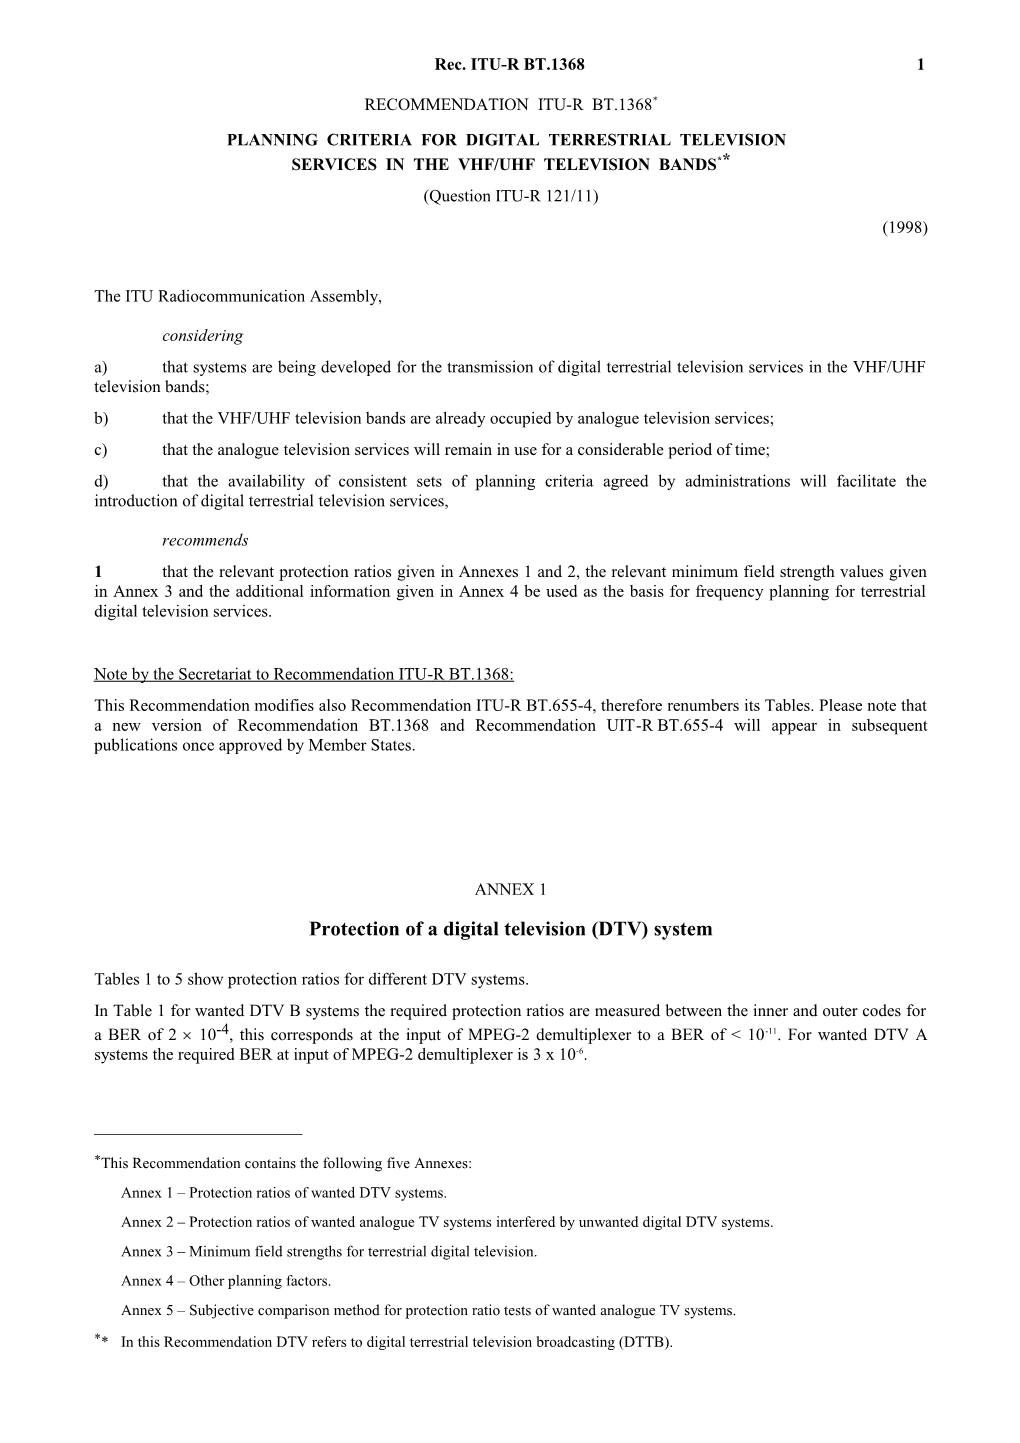 BT.1368 - Planning Criteria for Digital Terrestrial Television Services in the VHF/UHF